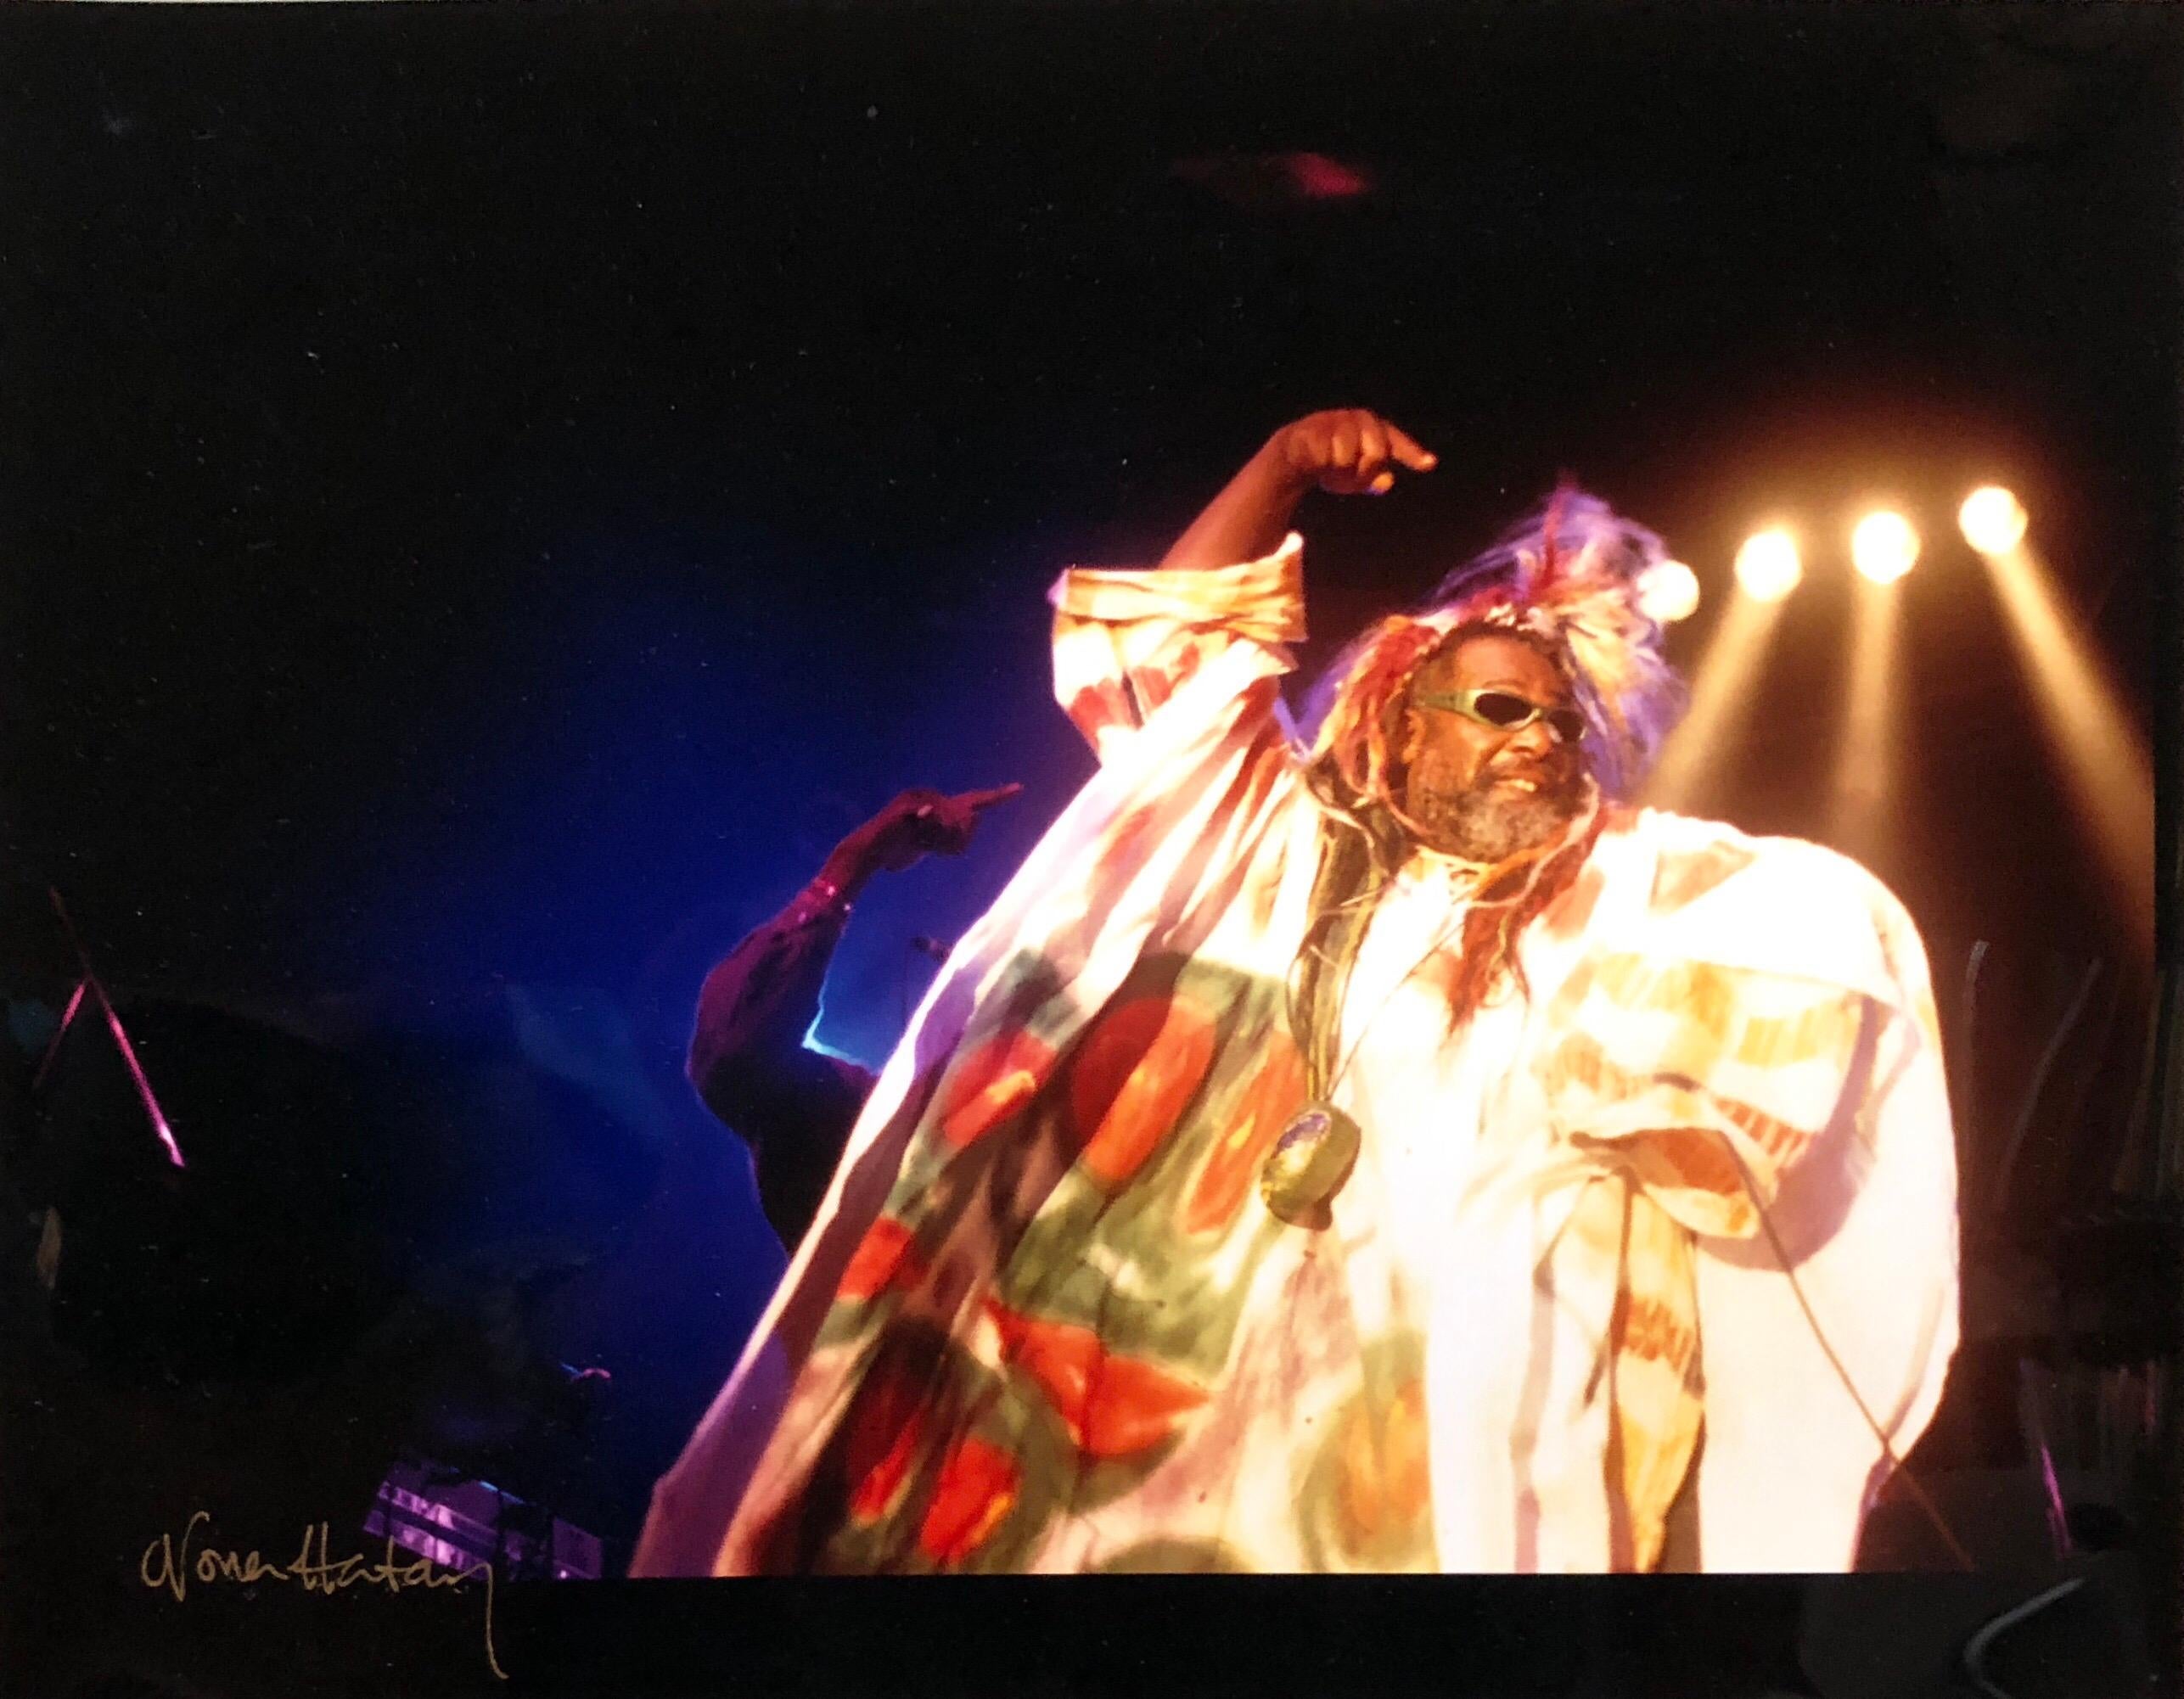 Nona Hatay Color Photograph - Color Rock & Roll Photo Hand Signed Woodstock Music Festival African American 